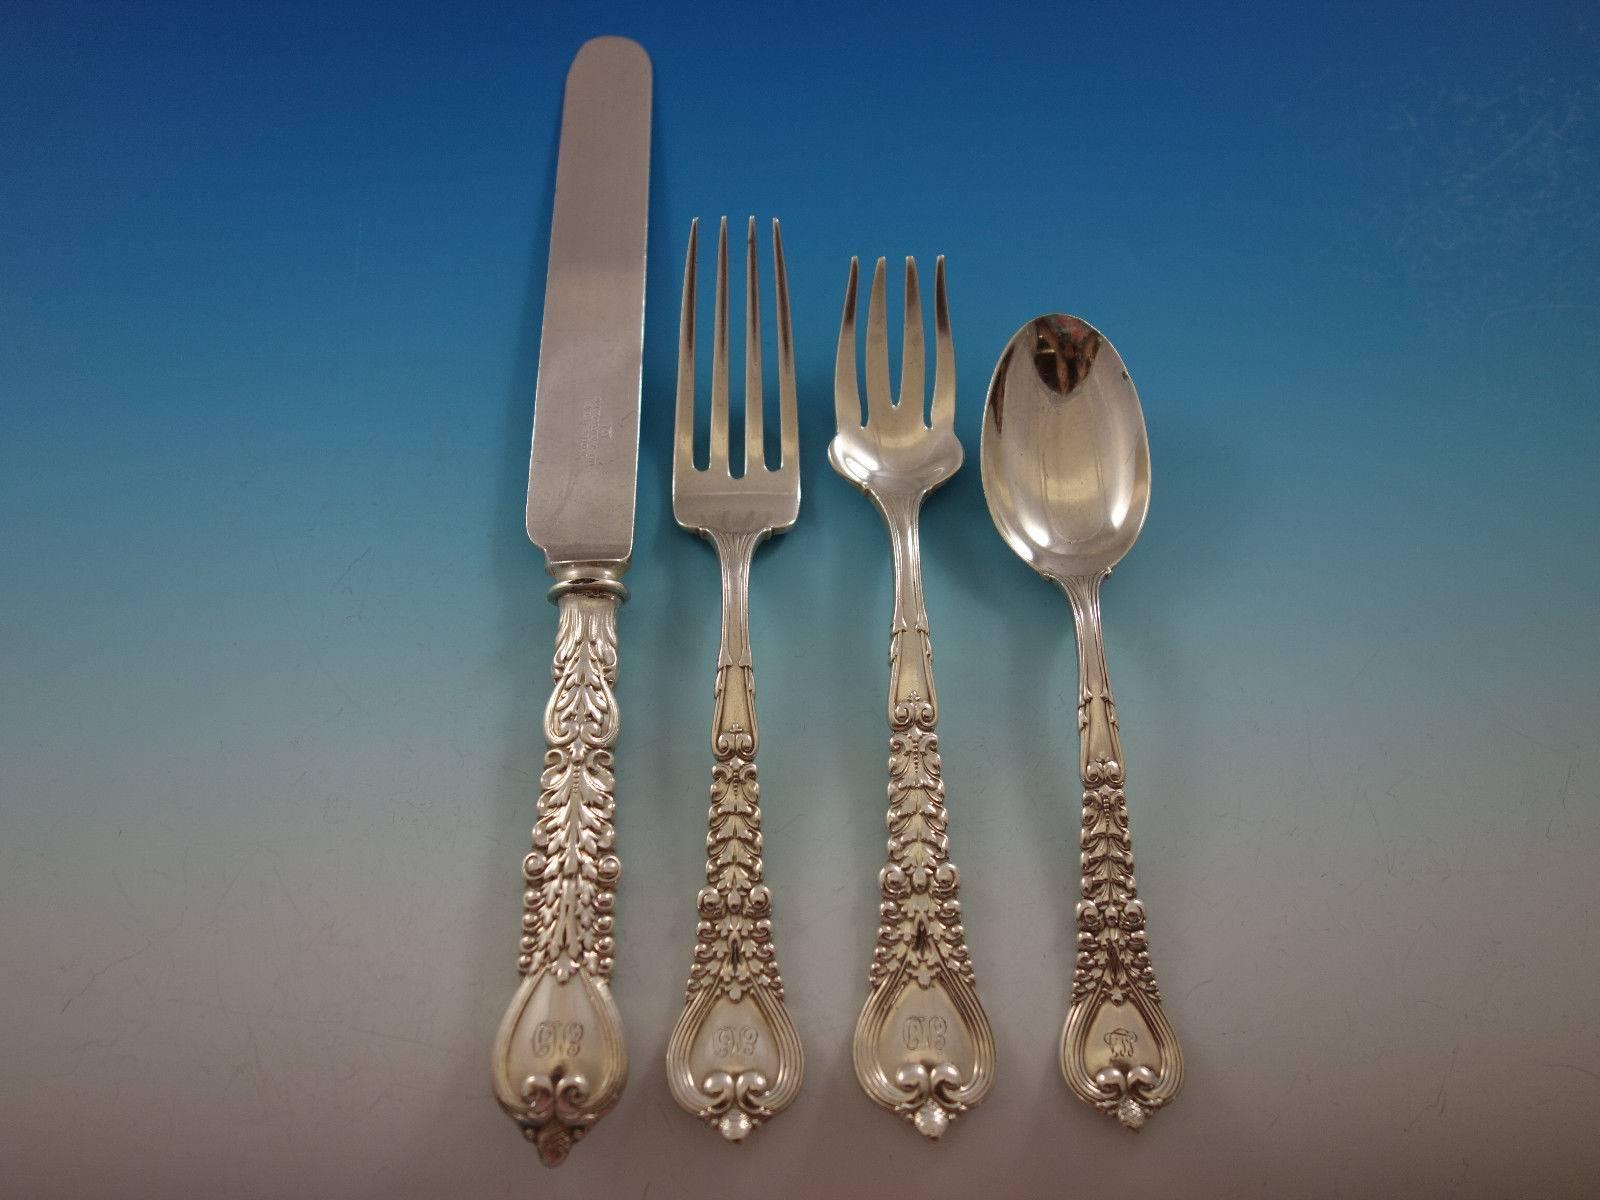 Monumental Florentine by Tiffany & Co. sterling silver flatware set of 240 pieces in fitted Tiffany chest. This set includes: 

18 dinner size knives, blunt, 10 1/4